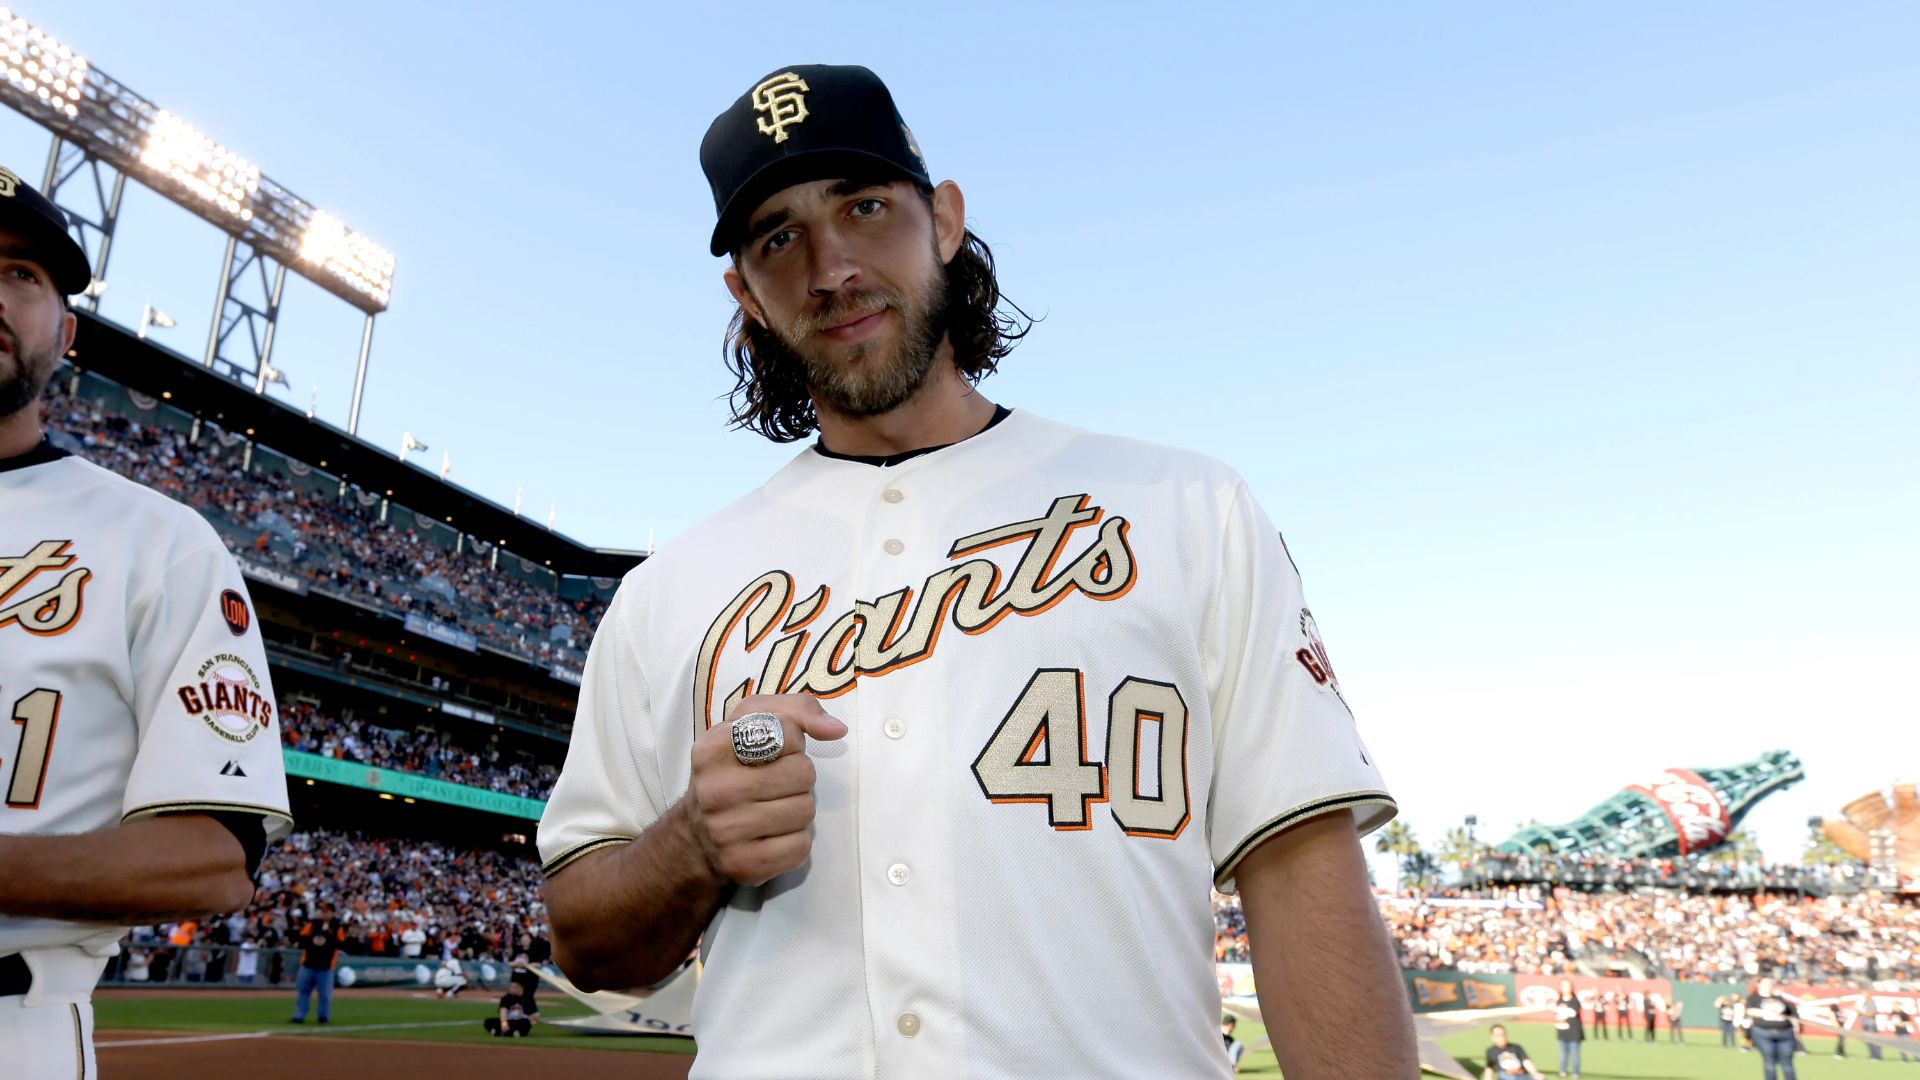 Madison Bumgarner wearing a cap along with his Giants uniform.